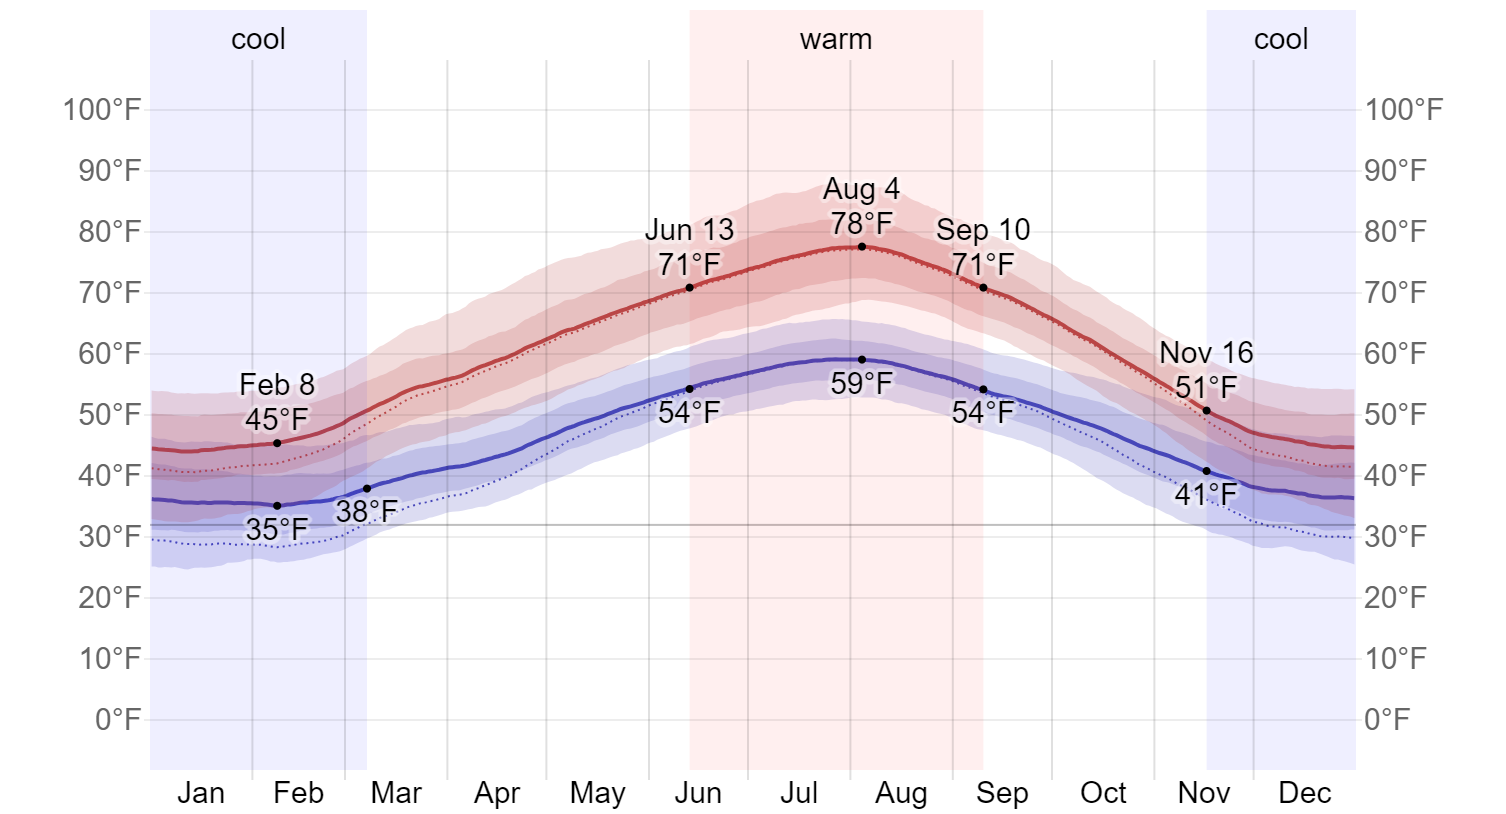 Paris experiences a temperate climate with distinct seasons. Winters, from December to March, bring chilly temperatures ranging from 3°C to 7°C (37°F to 45°F). Spring, April to May, sees a rise to 8°C to 16°C (46°F to 61°F). Summers, June to August, bring warmth, ranging from 17°C to 25°C (63°F to 77°F). Fall, September to November, gradually cools back to 9°C to 15°C (48°F to 59°F). 